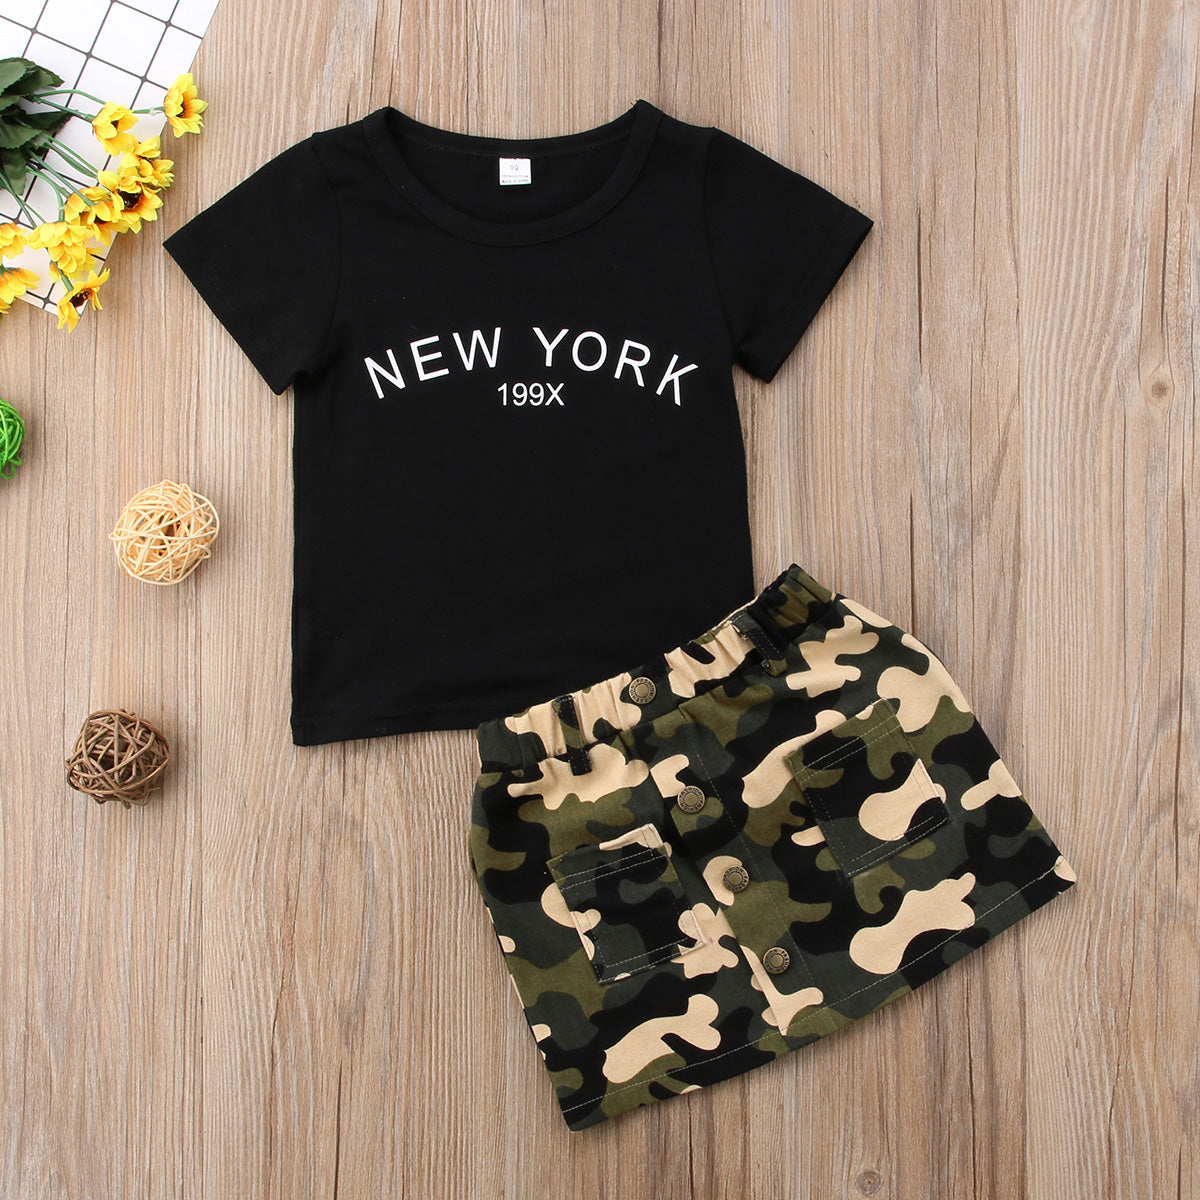 Little Miss Camo Summer Set with Black Letters T-shirt and Camo Skirt